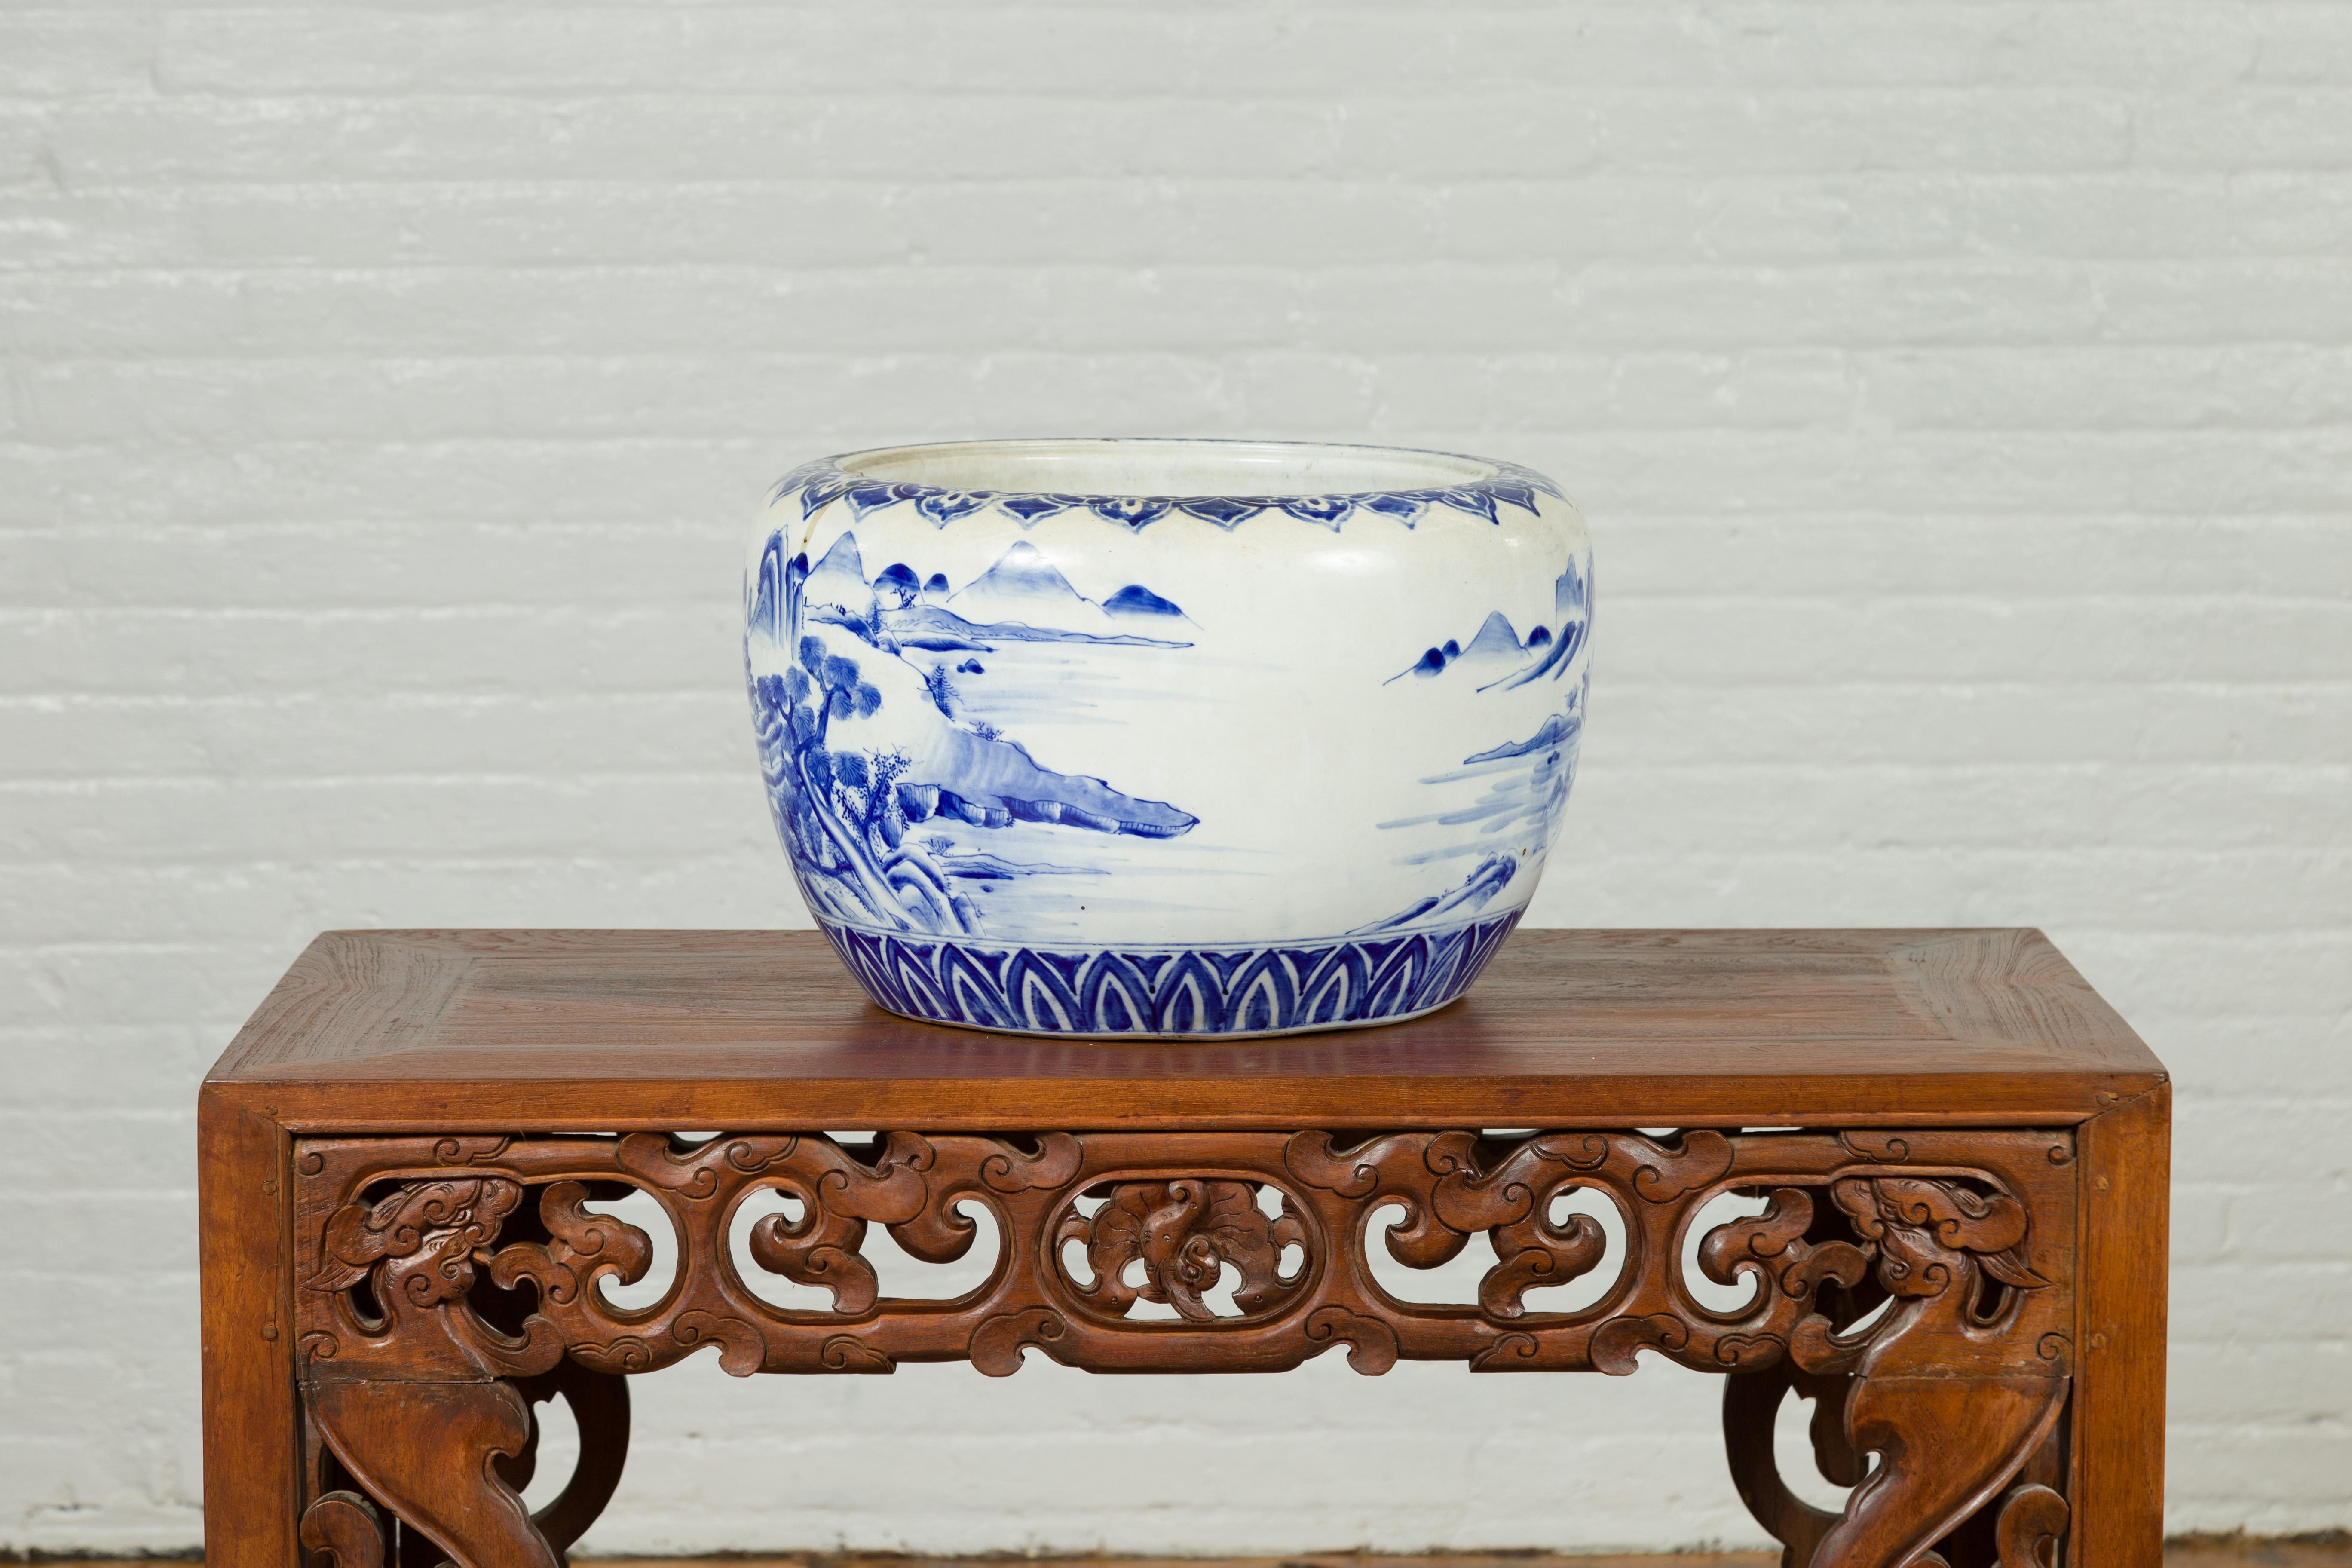 Japanese Meiji Period 19th Century Blue and White Round Porcelain Planter For Sale 4